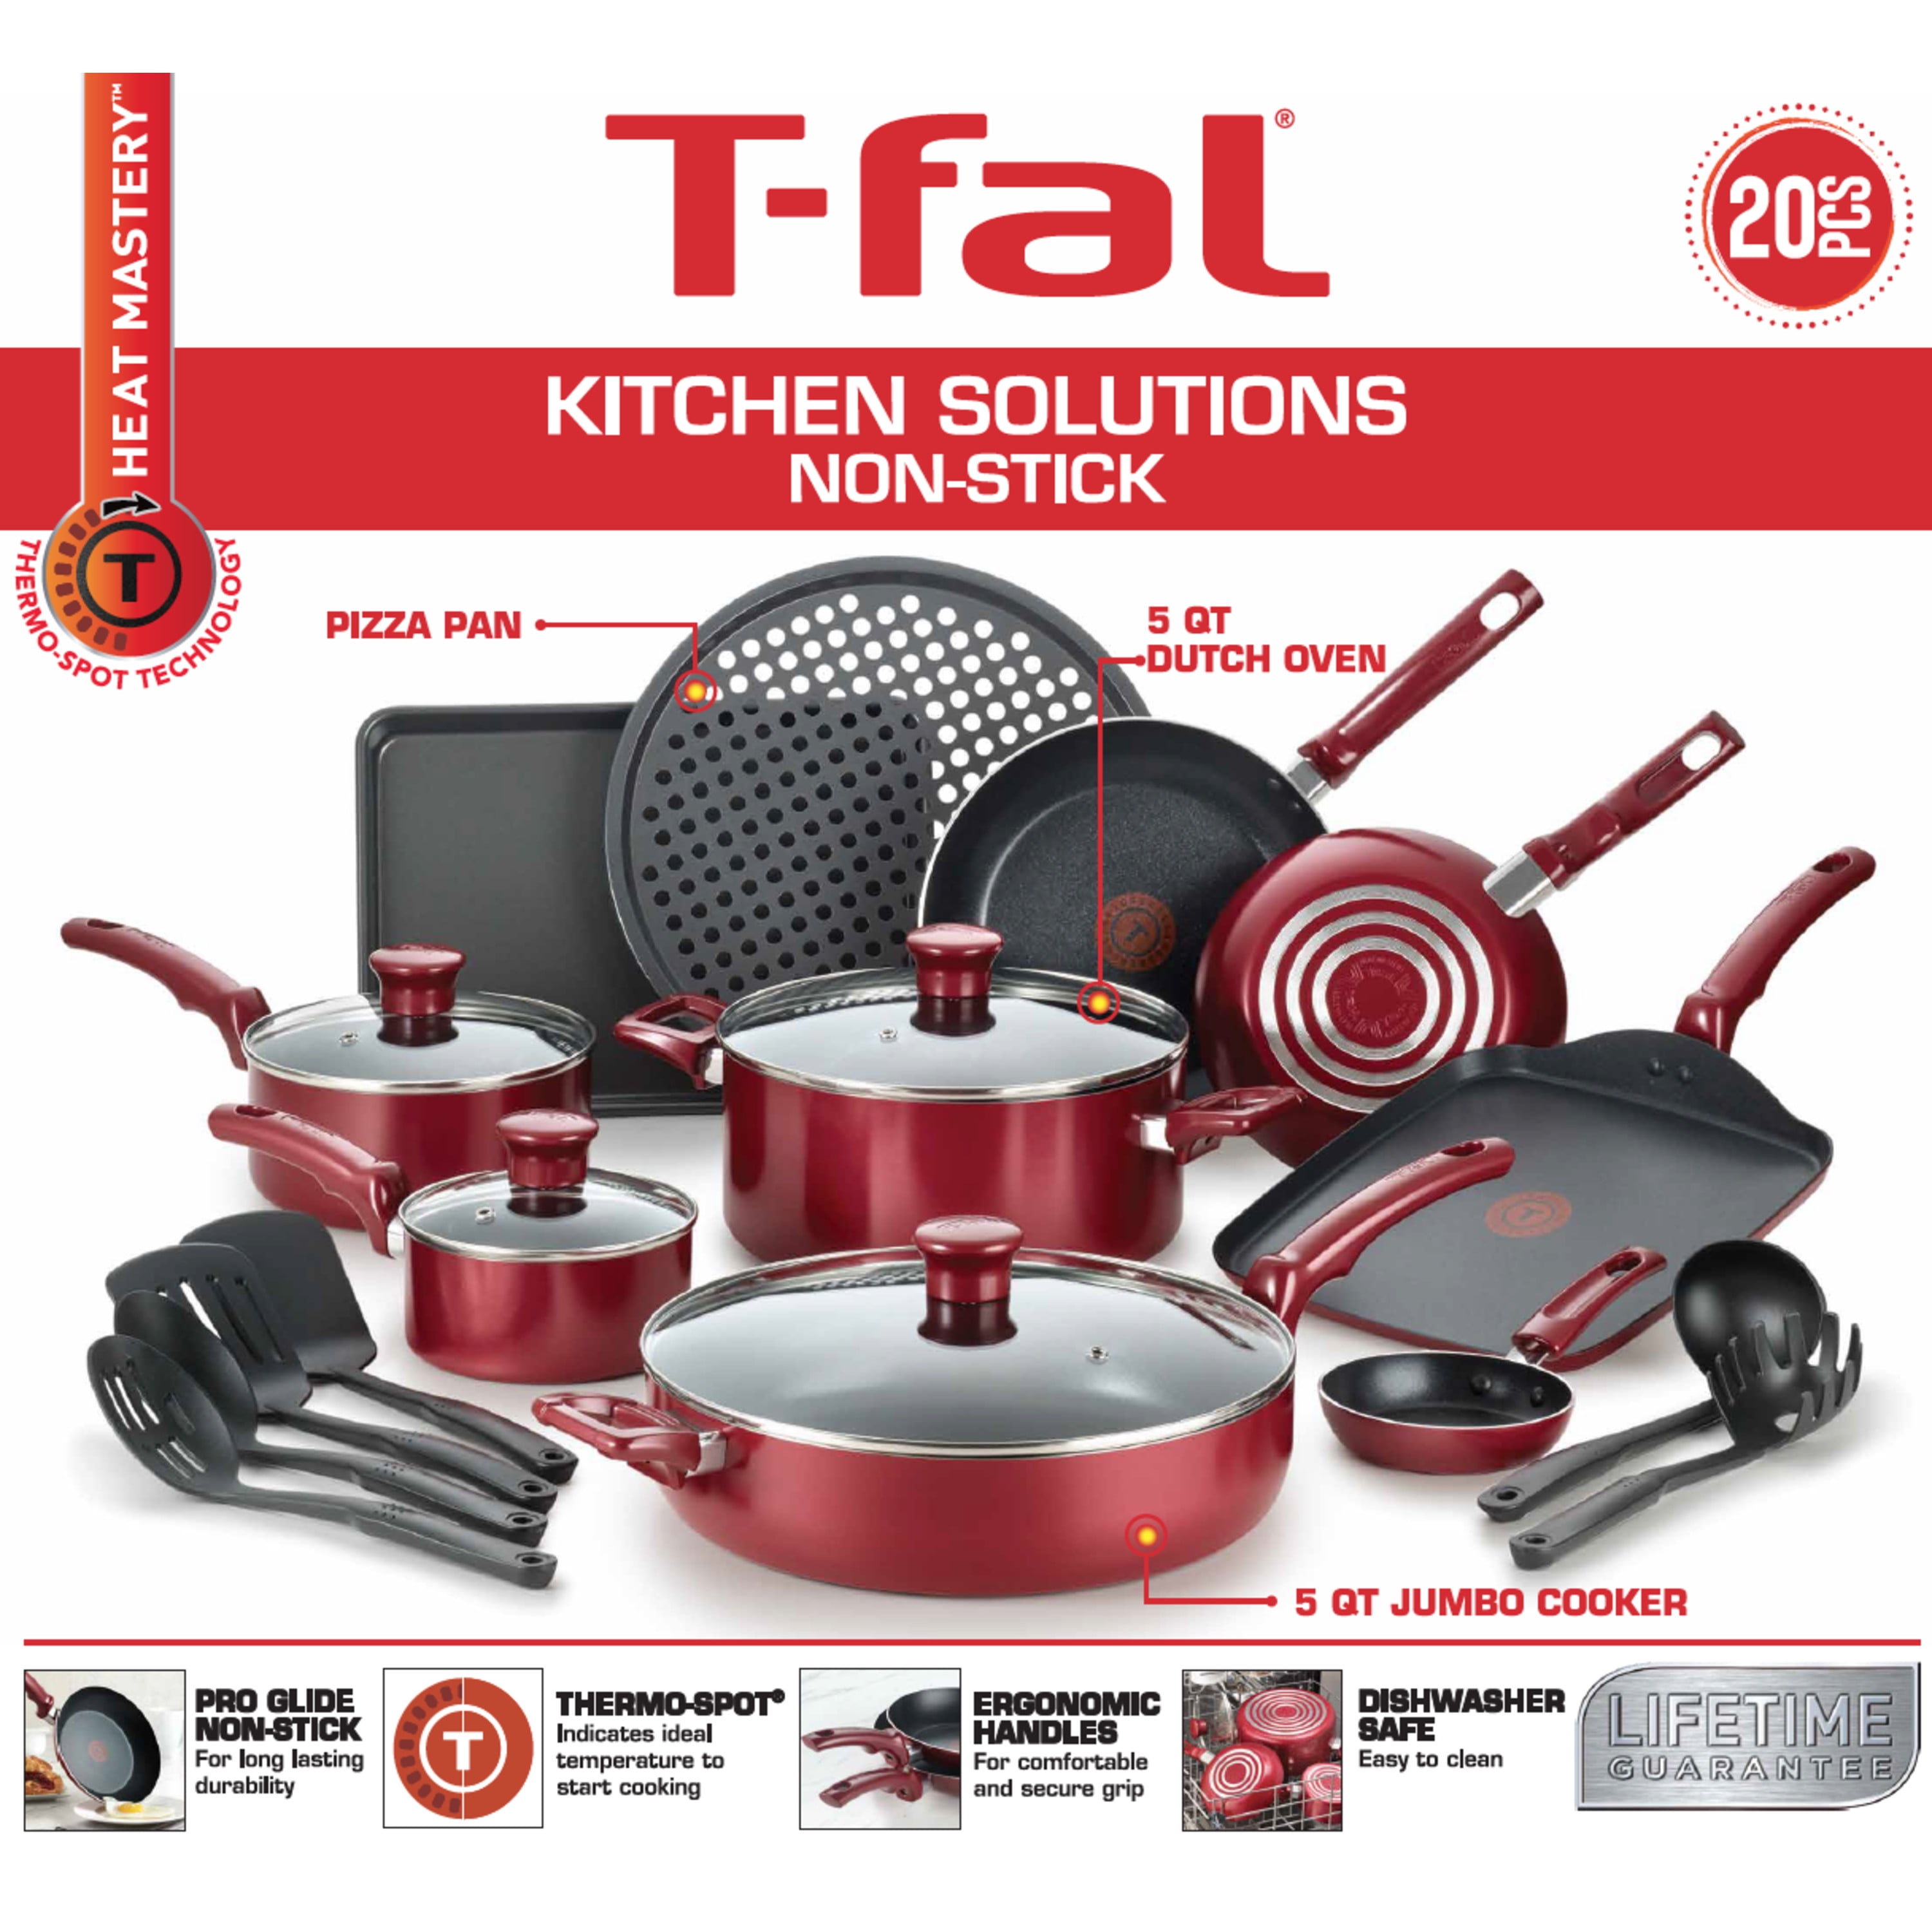 This 20-piece T-fal Cookware Set is 25% off at Walmart today: $60